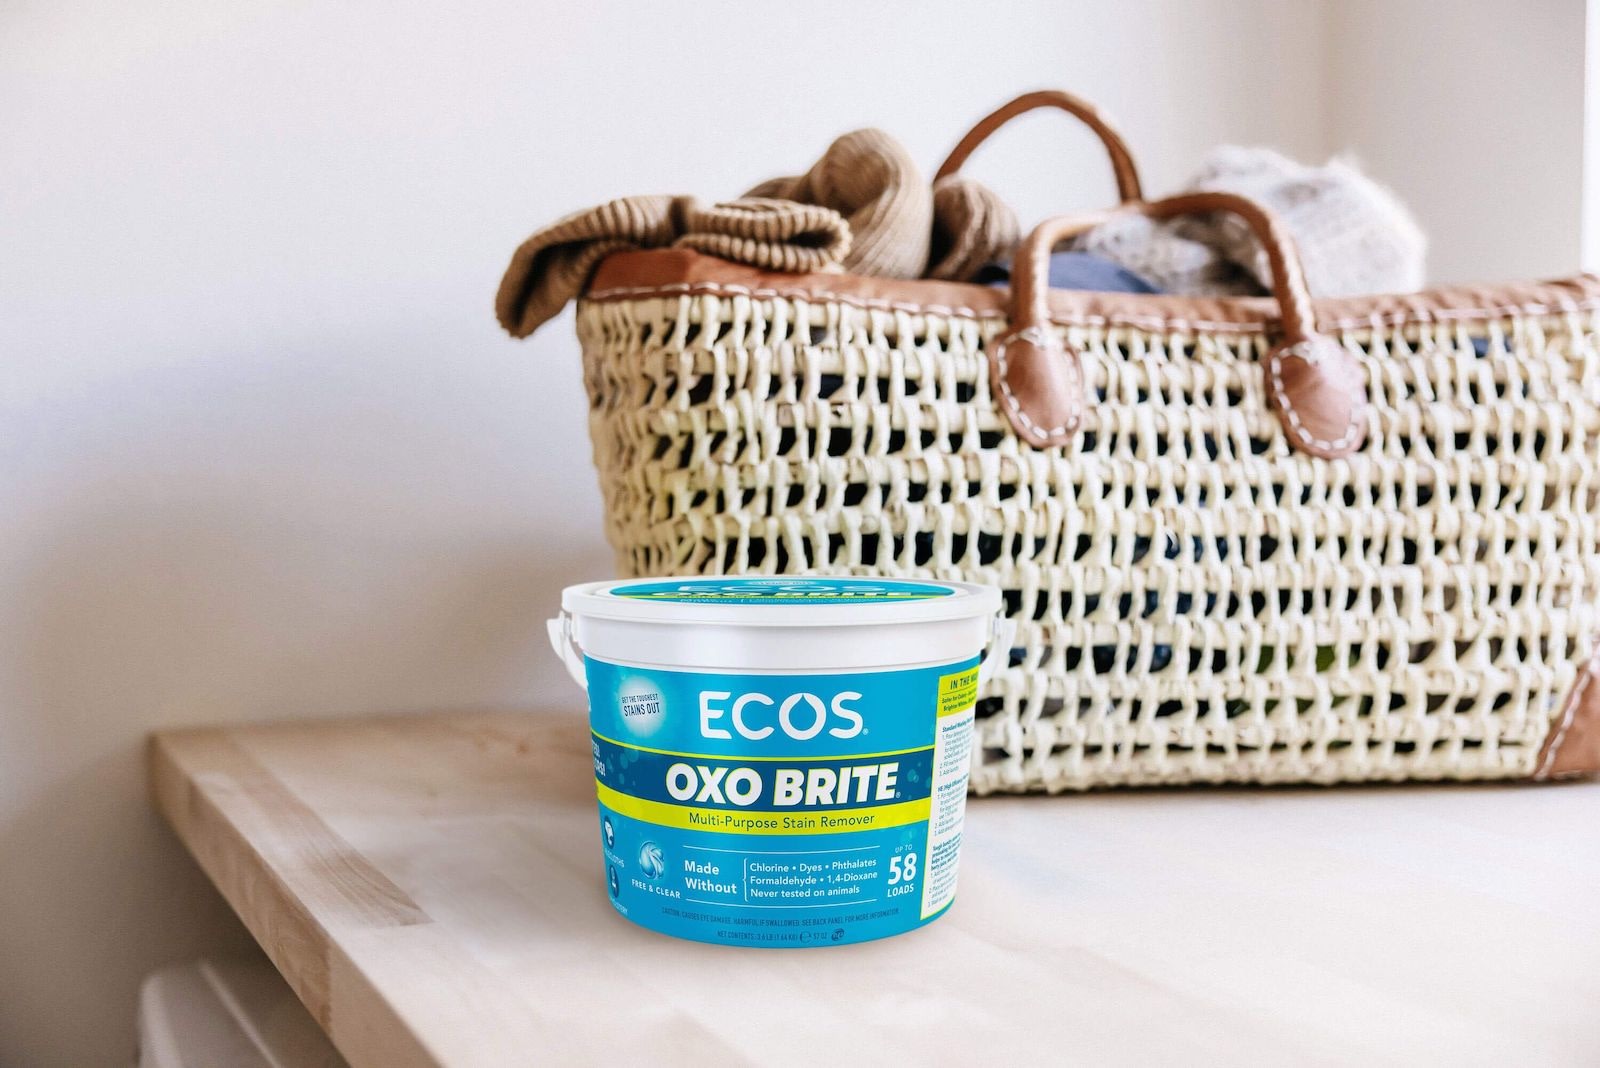 Organic Fruit & Vegetable Wash To Clean Produce - ECOS®